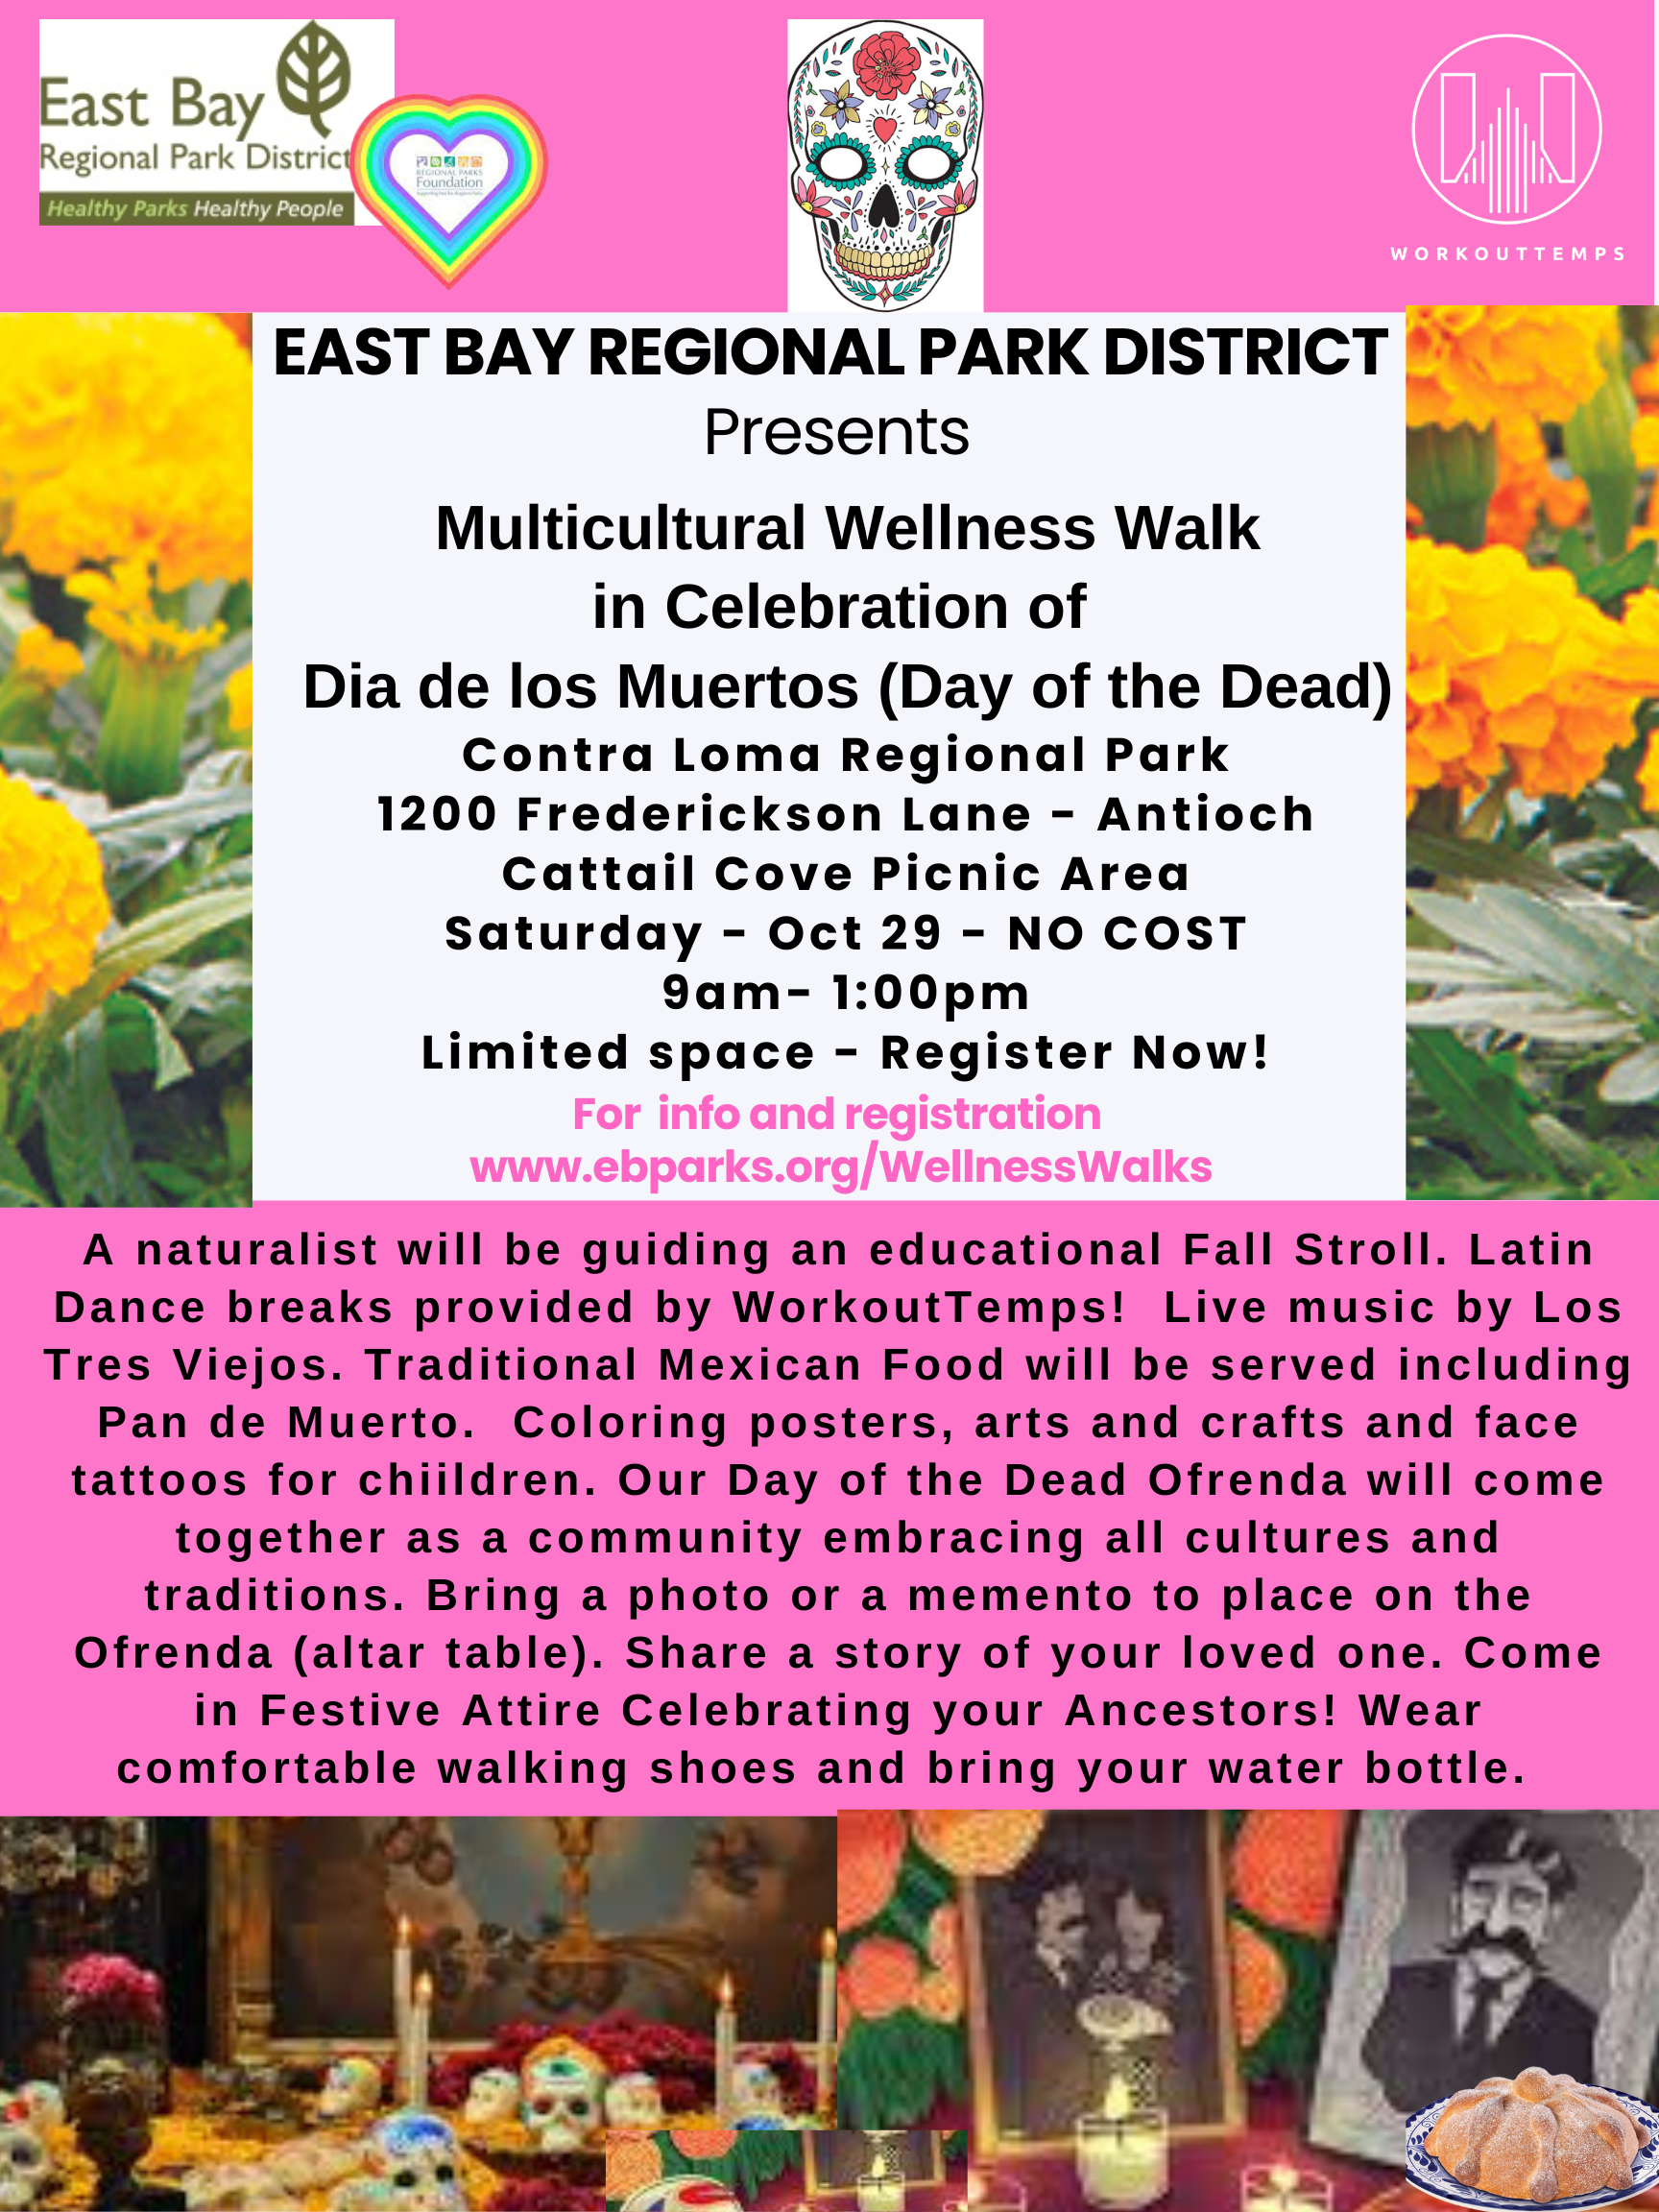 Multicultural Wellness Walk - Day of the Dead - October 29 Program Poster